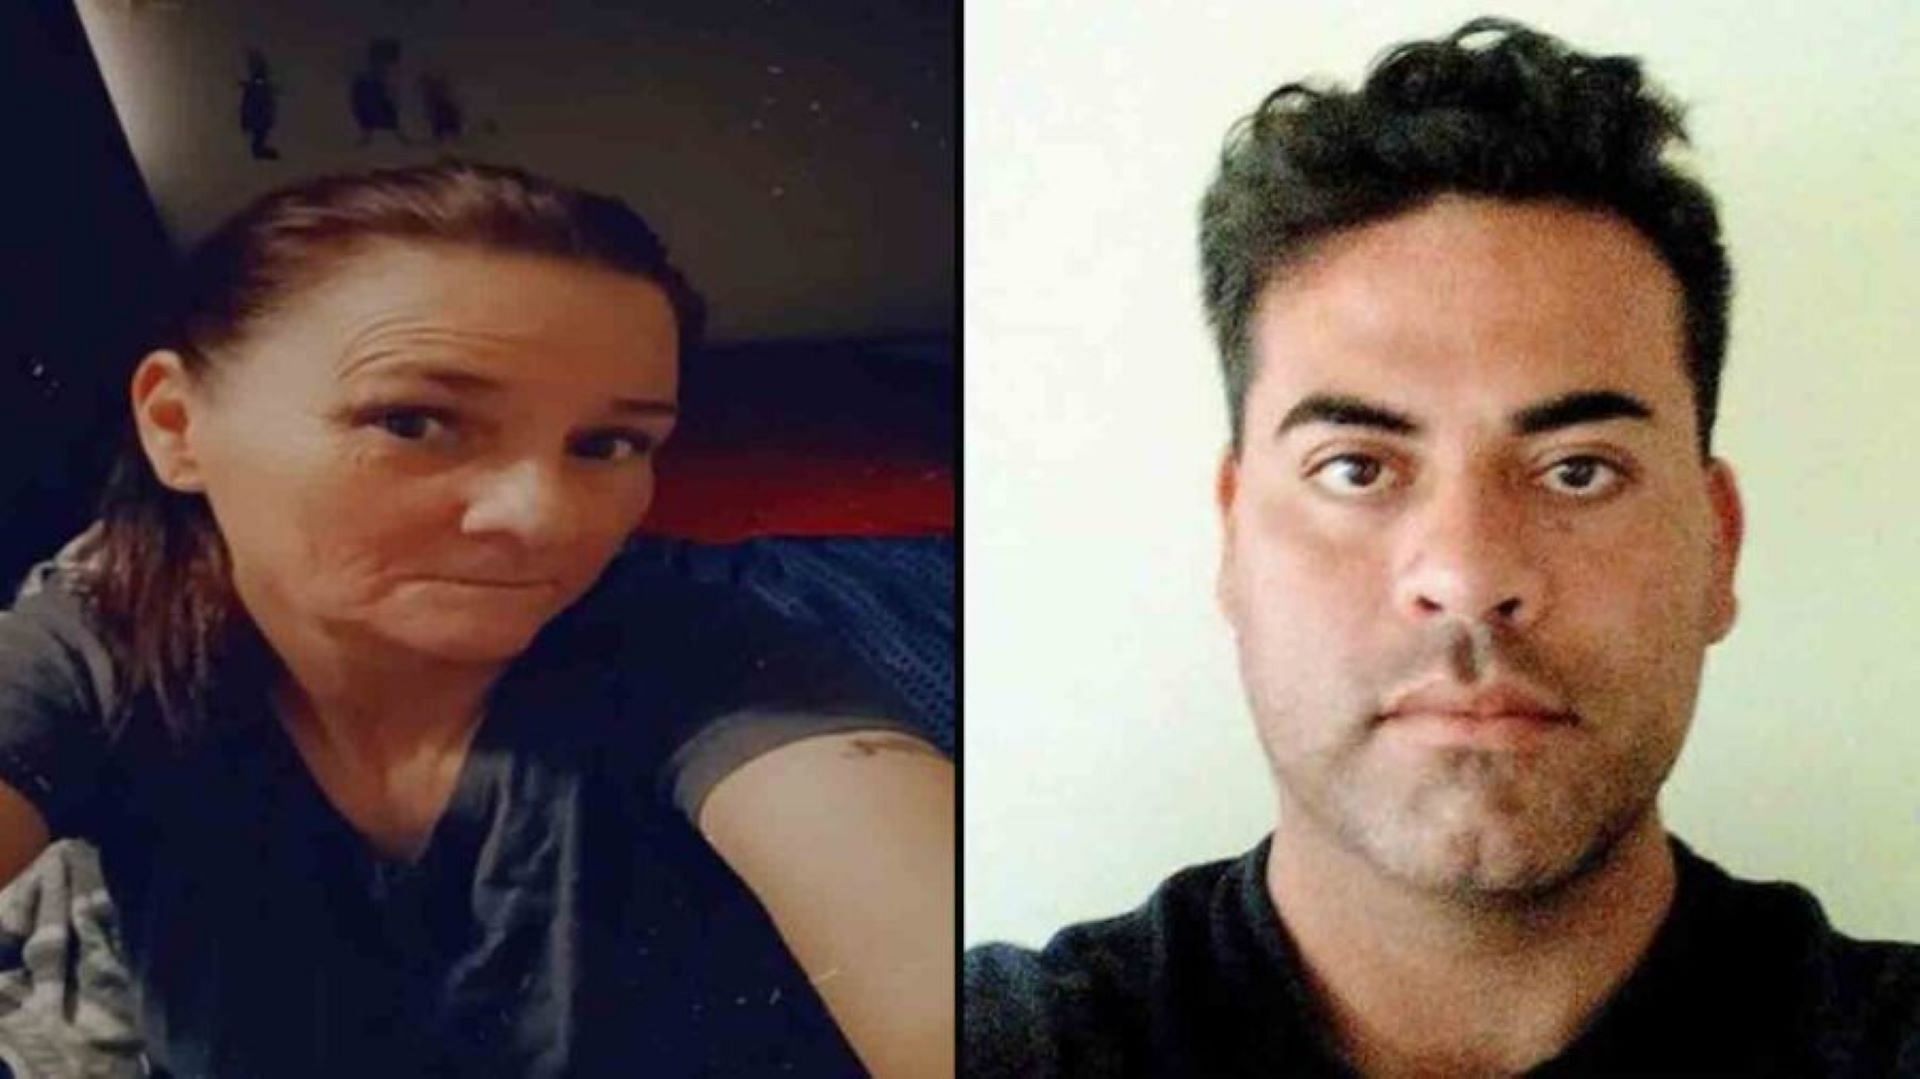 Richard Paul Rodriguez (right) charged after Christi Romero (left) of Arizona found dead in a car trunk. (Image via Facebook/Holbrook Arizona Police Department)